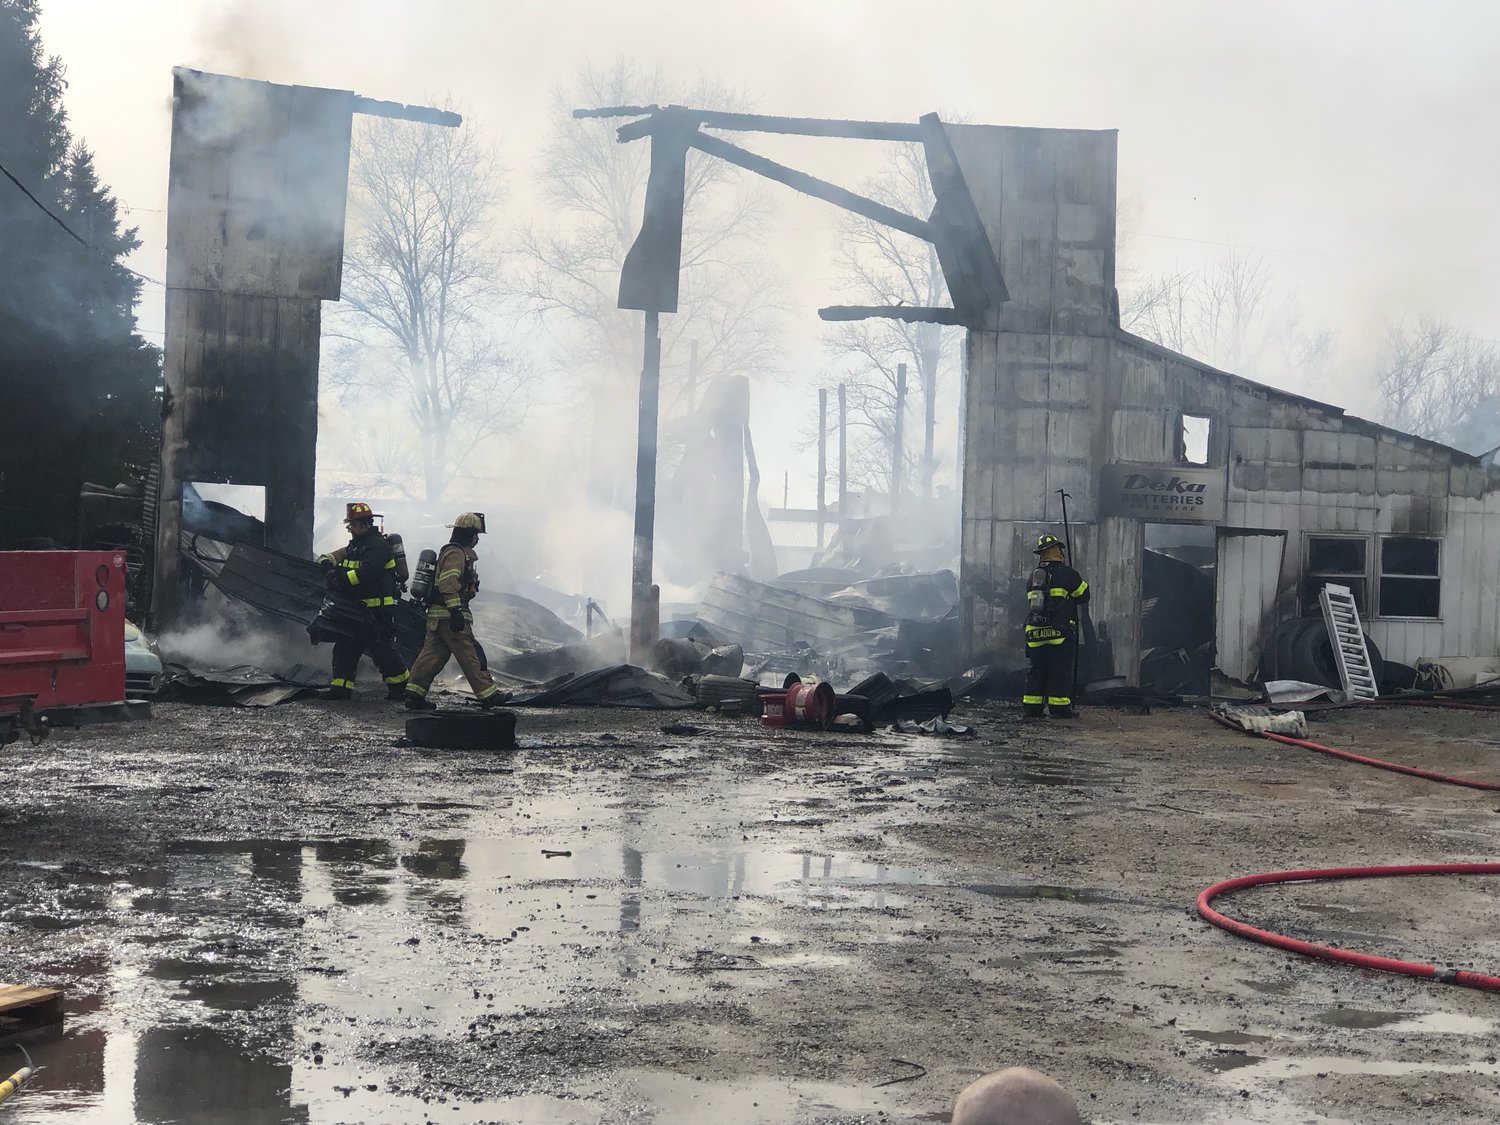 Firefighters from several departments responded Wednesday morning to a structure fire in the 100 block of East Wabash Street in Wingate. The fire was reported about 10:45 a.m. at Bane Auto LLC, an auto repair and tire service shop. No injuries were reported. The building and its contents were destroyed in the blaze.